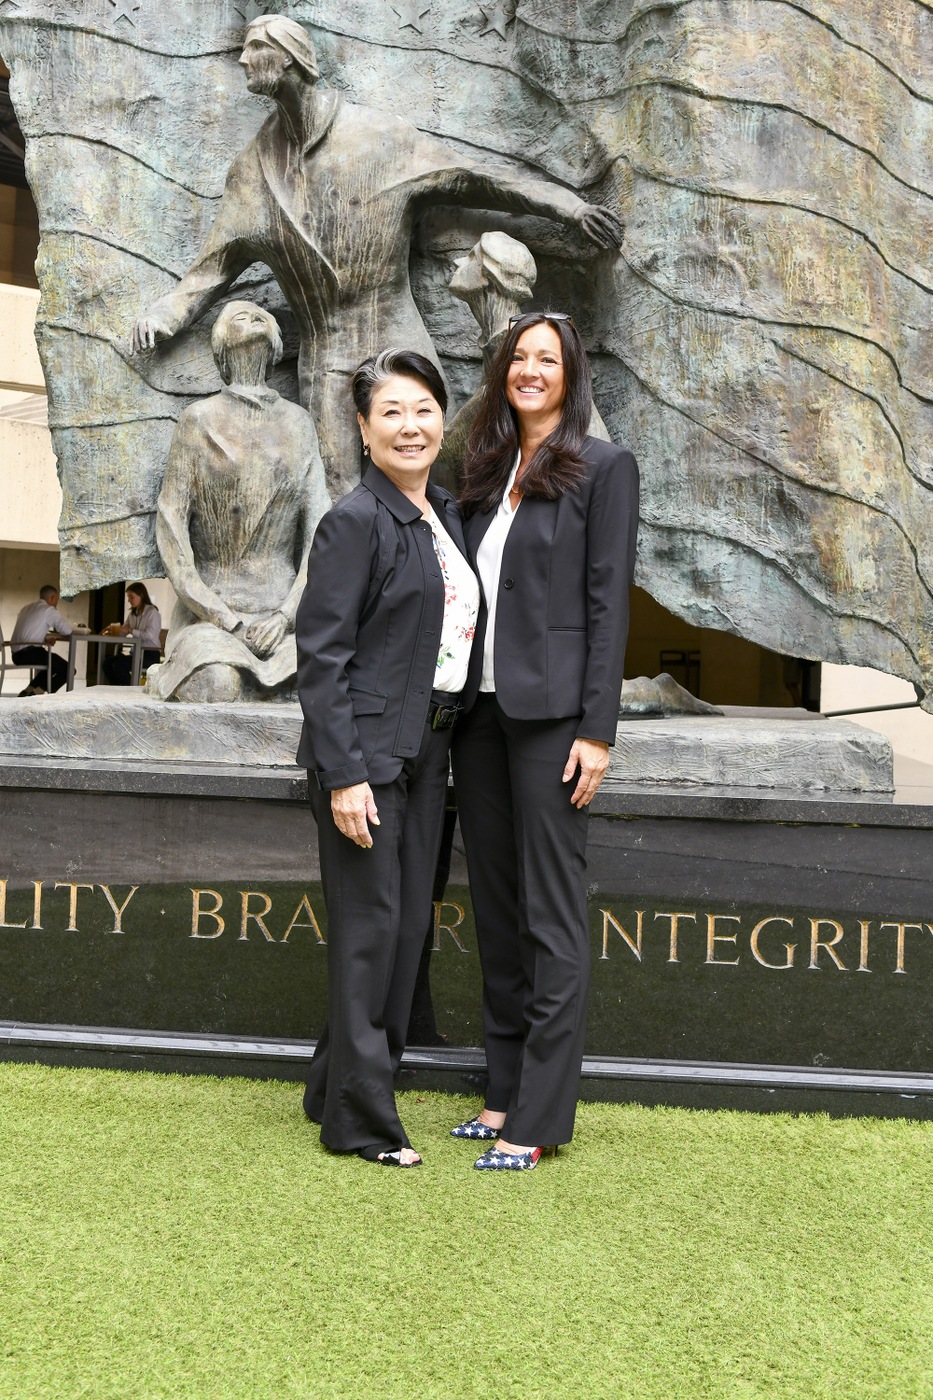 Jo Ann Sakato (left) was the first female Asian American special agent in the FBI. Larissa Knapp is now the highest ranking female Asian American special agent in the FBI. Knapp serves as the executive assistant director of the the FBI's National Security Branch.